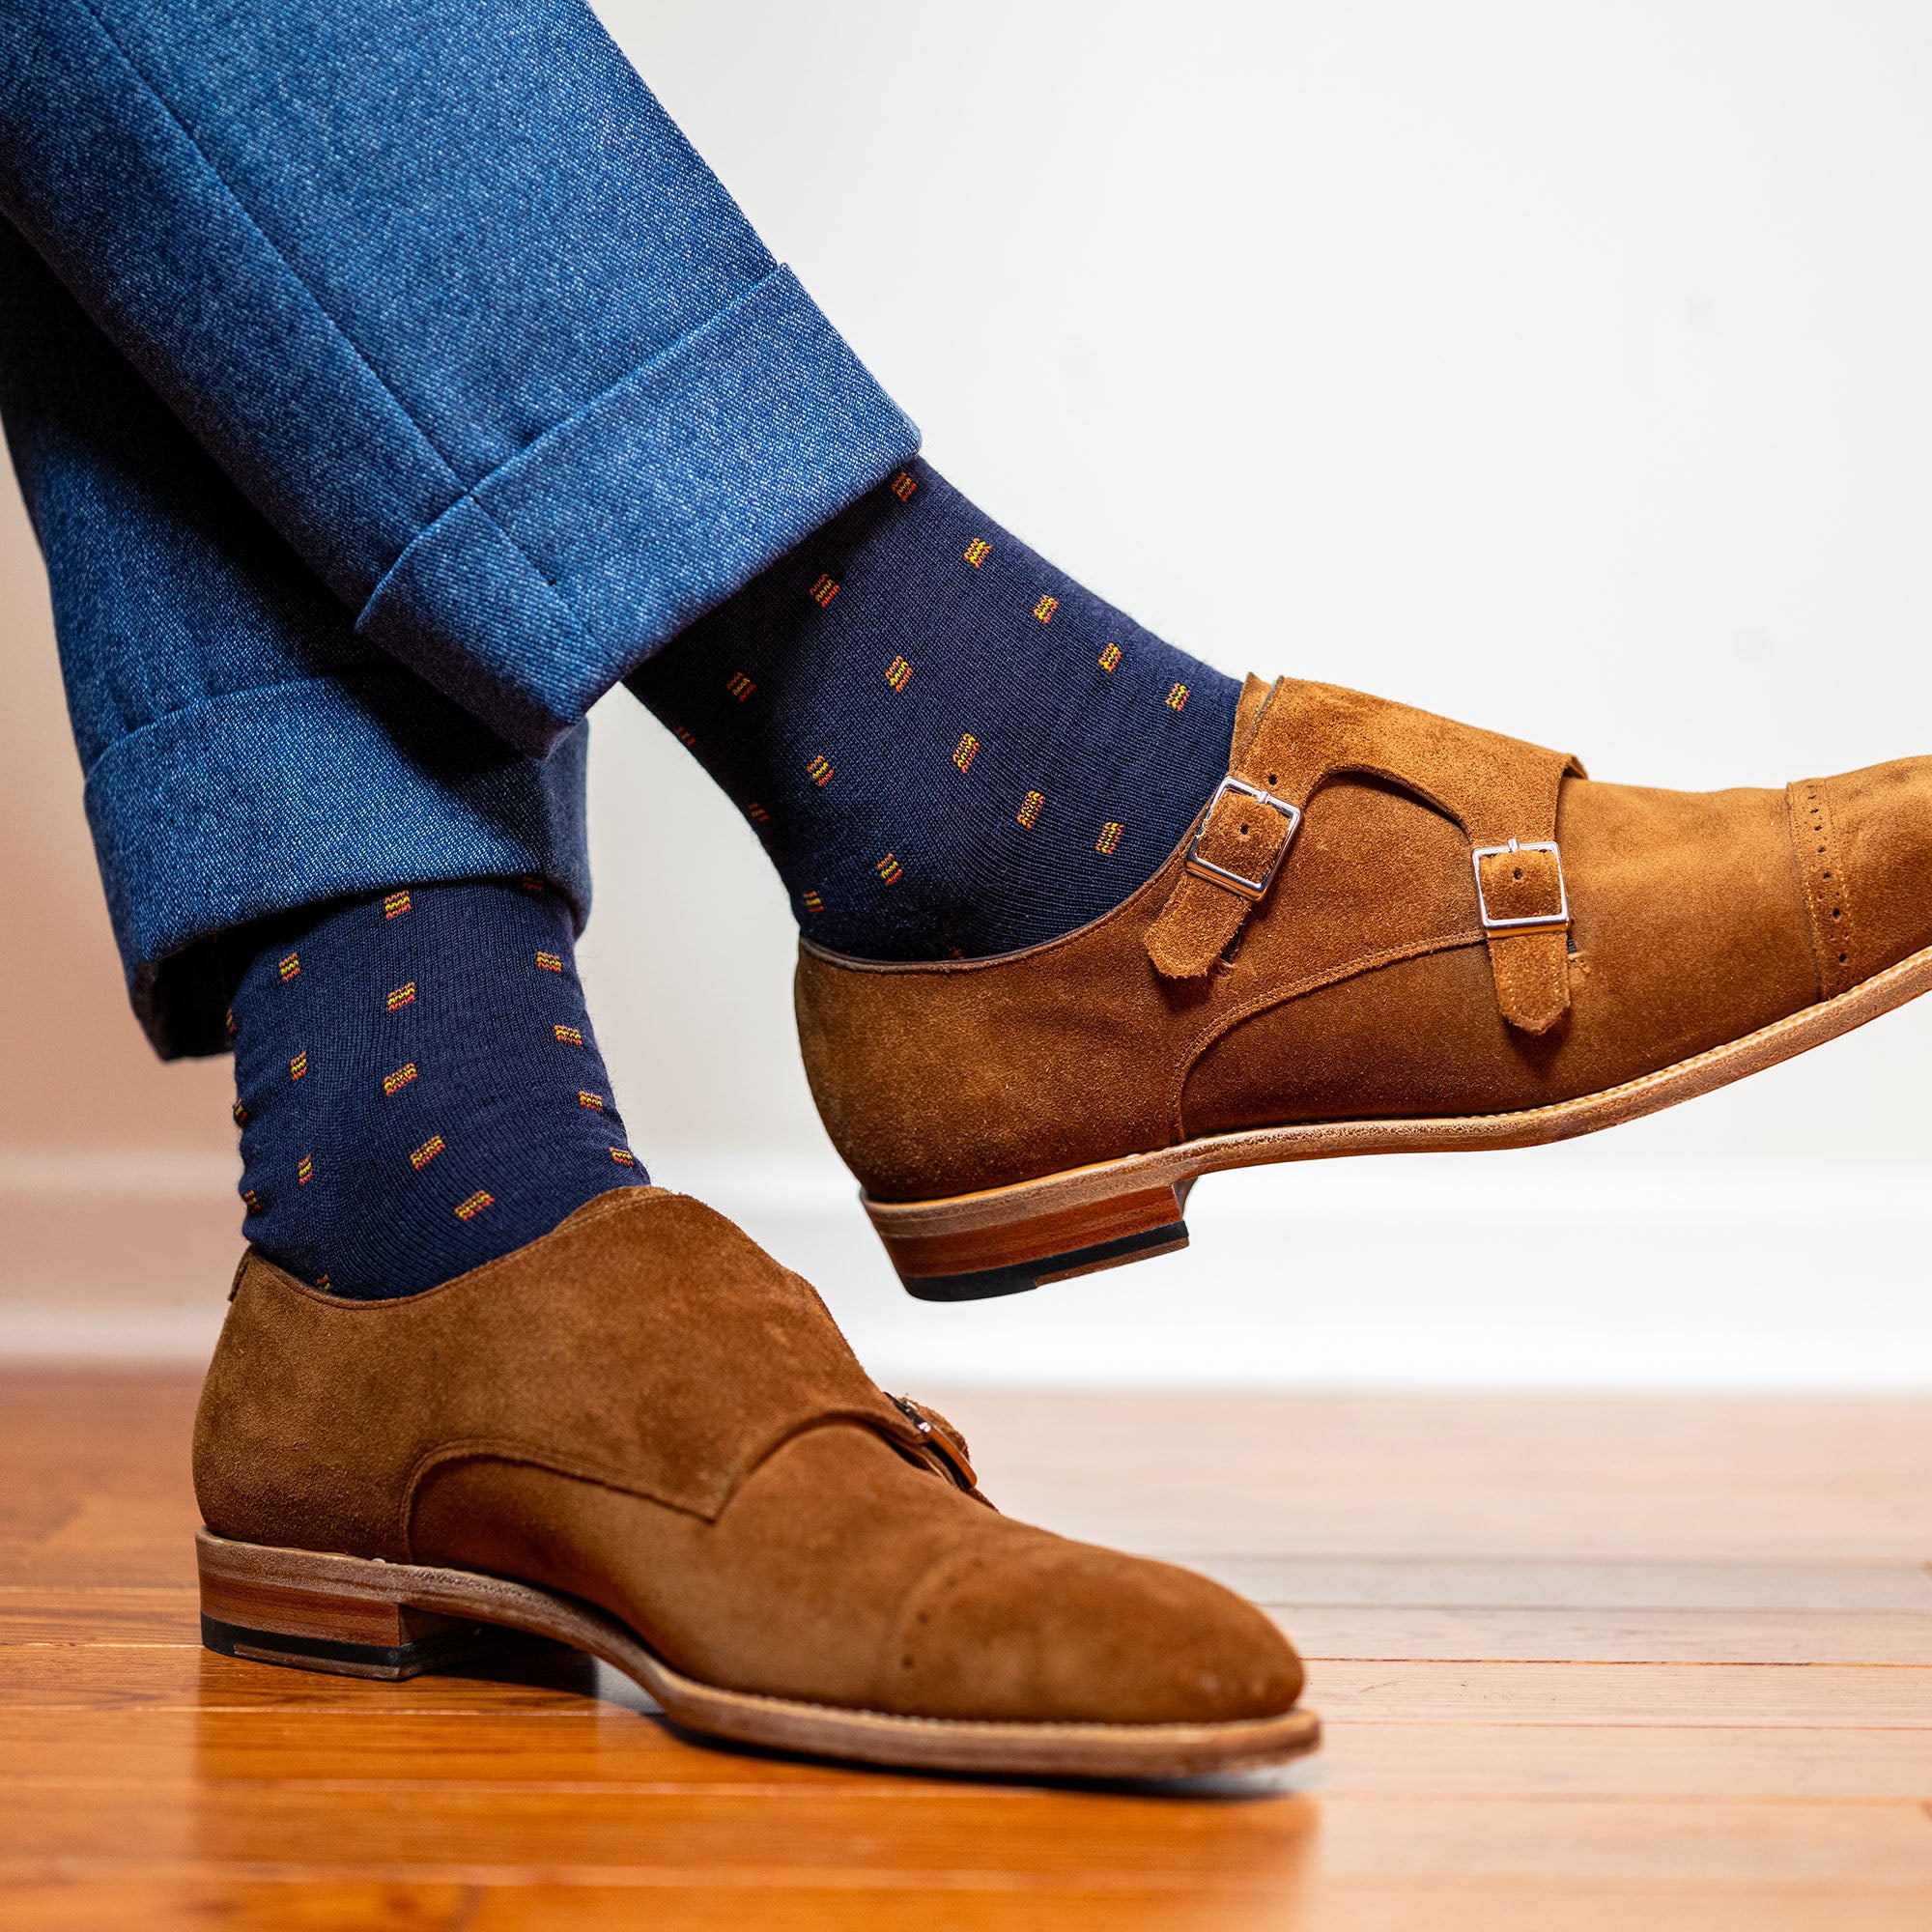 man crossing legs wearing navy and orange dress socks with light brown suede shoes